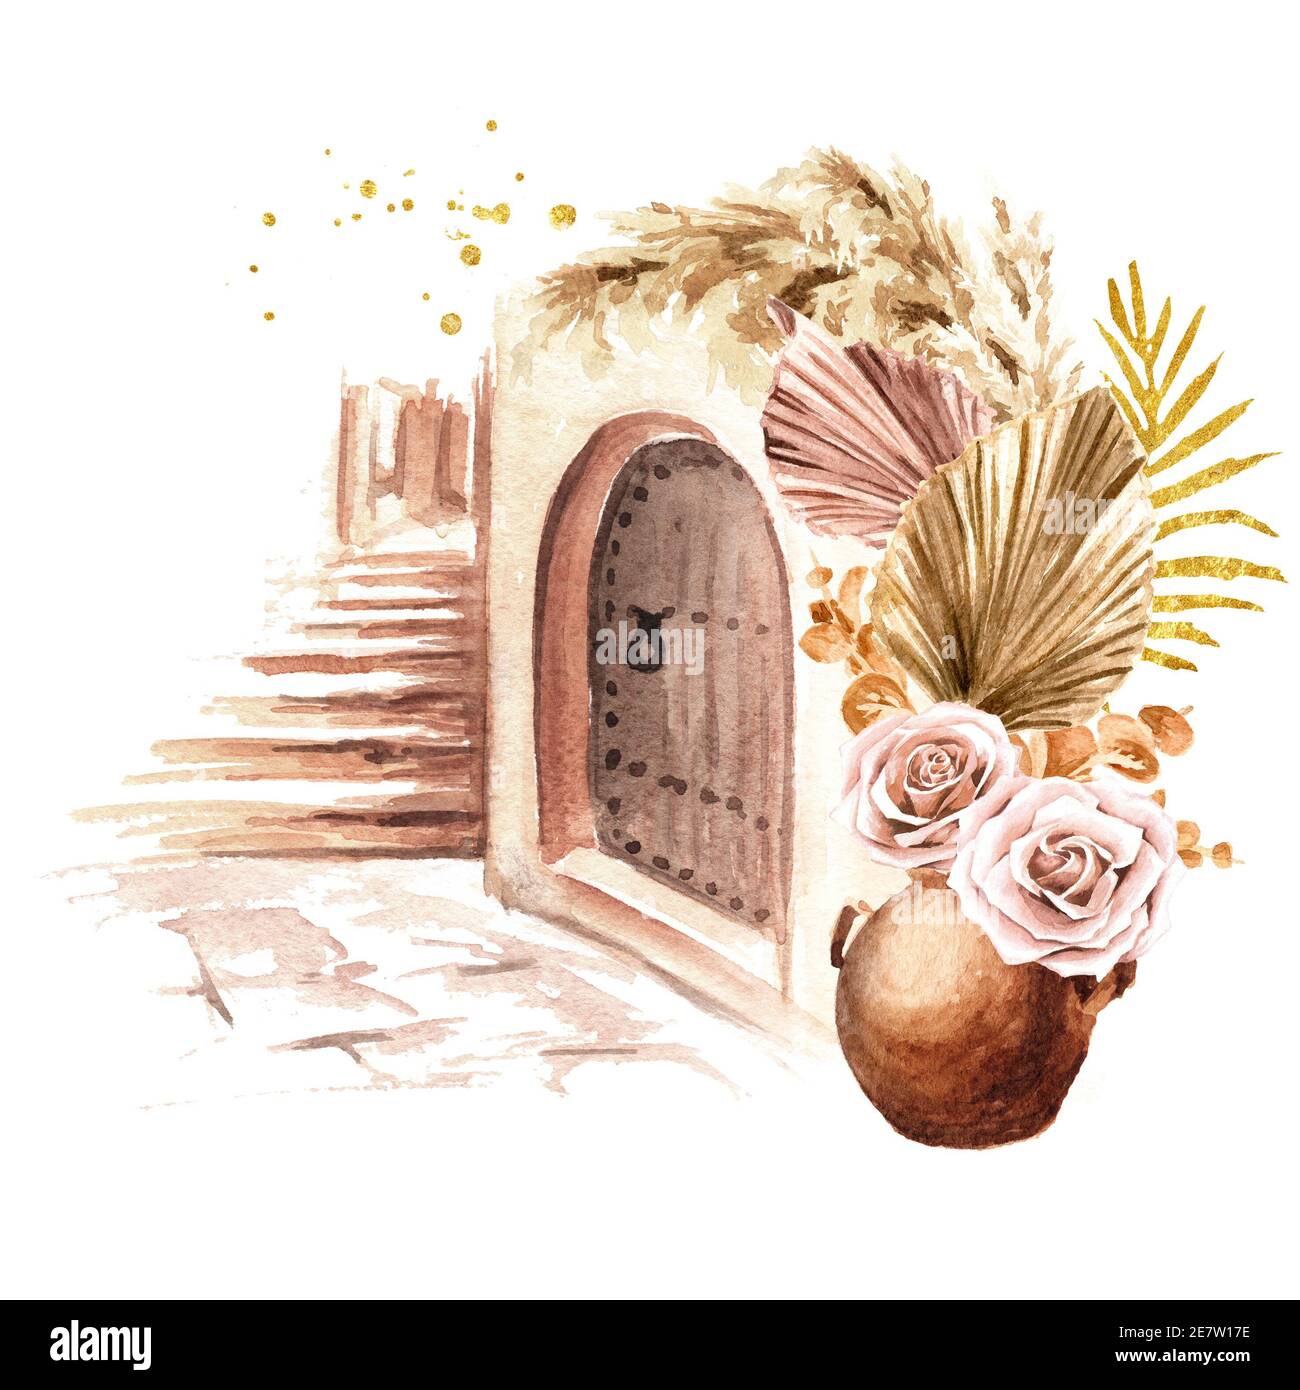 Boho Bouquet of dried rose flowers and palm leaves with element of Mediterranean, North Africa or Morocco architecture, Hand drawn watercolor illustra Stock Photo